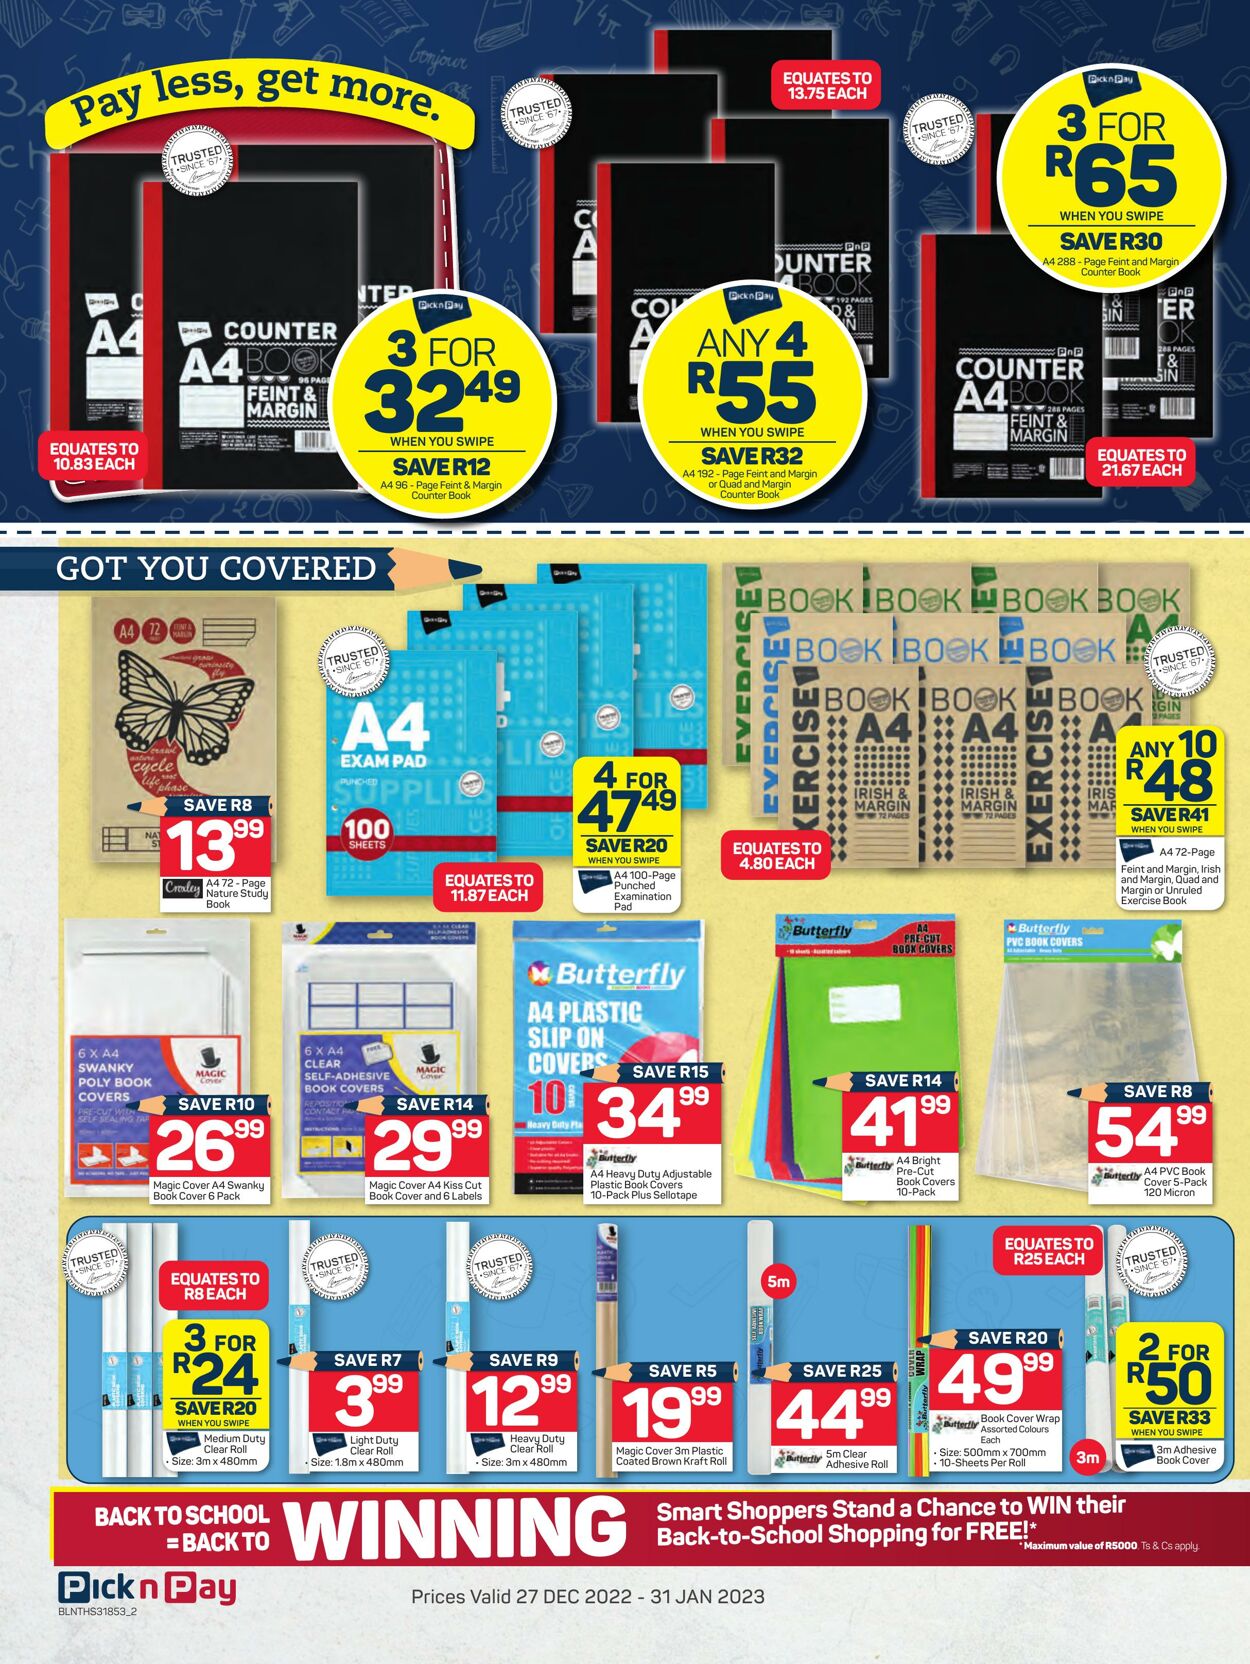 Pick n Pay Promotional Leaflet Back to School Valid from 27.12 to